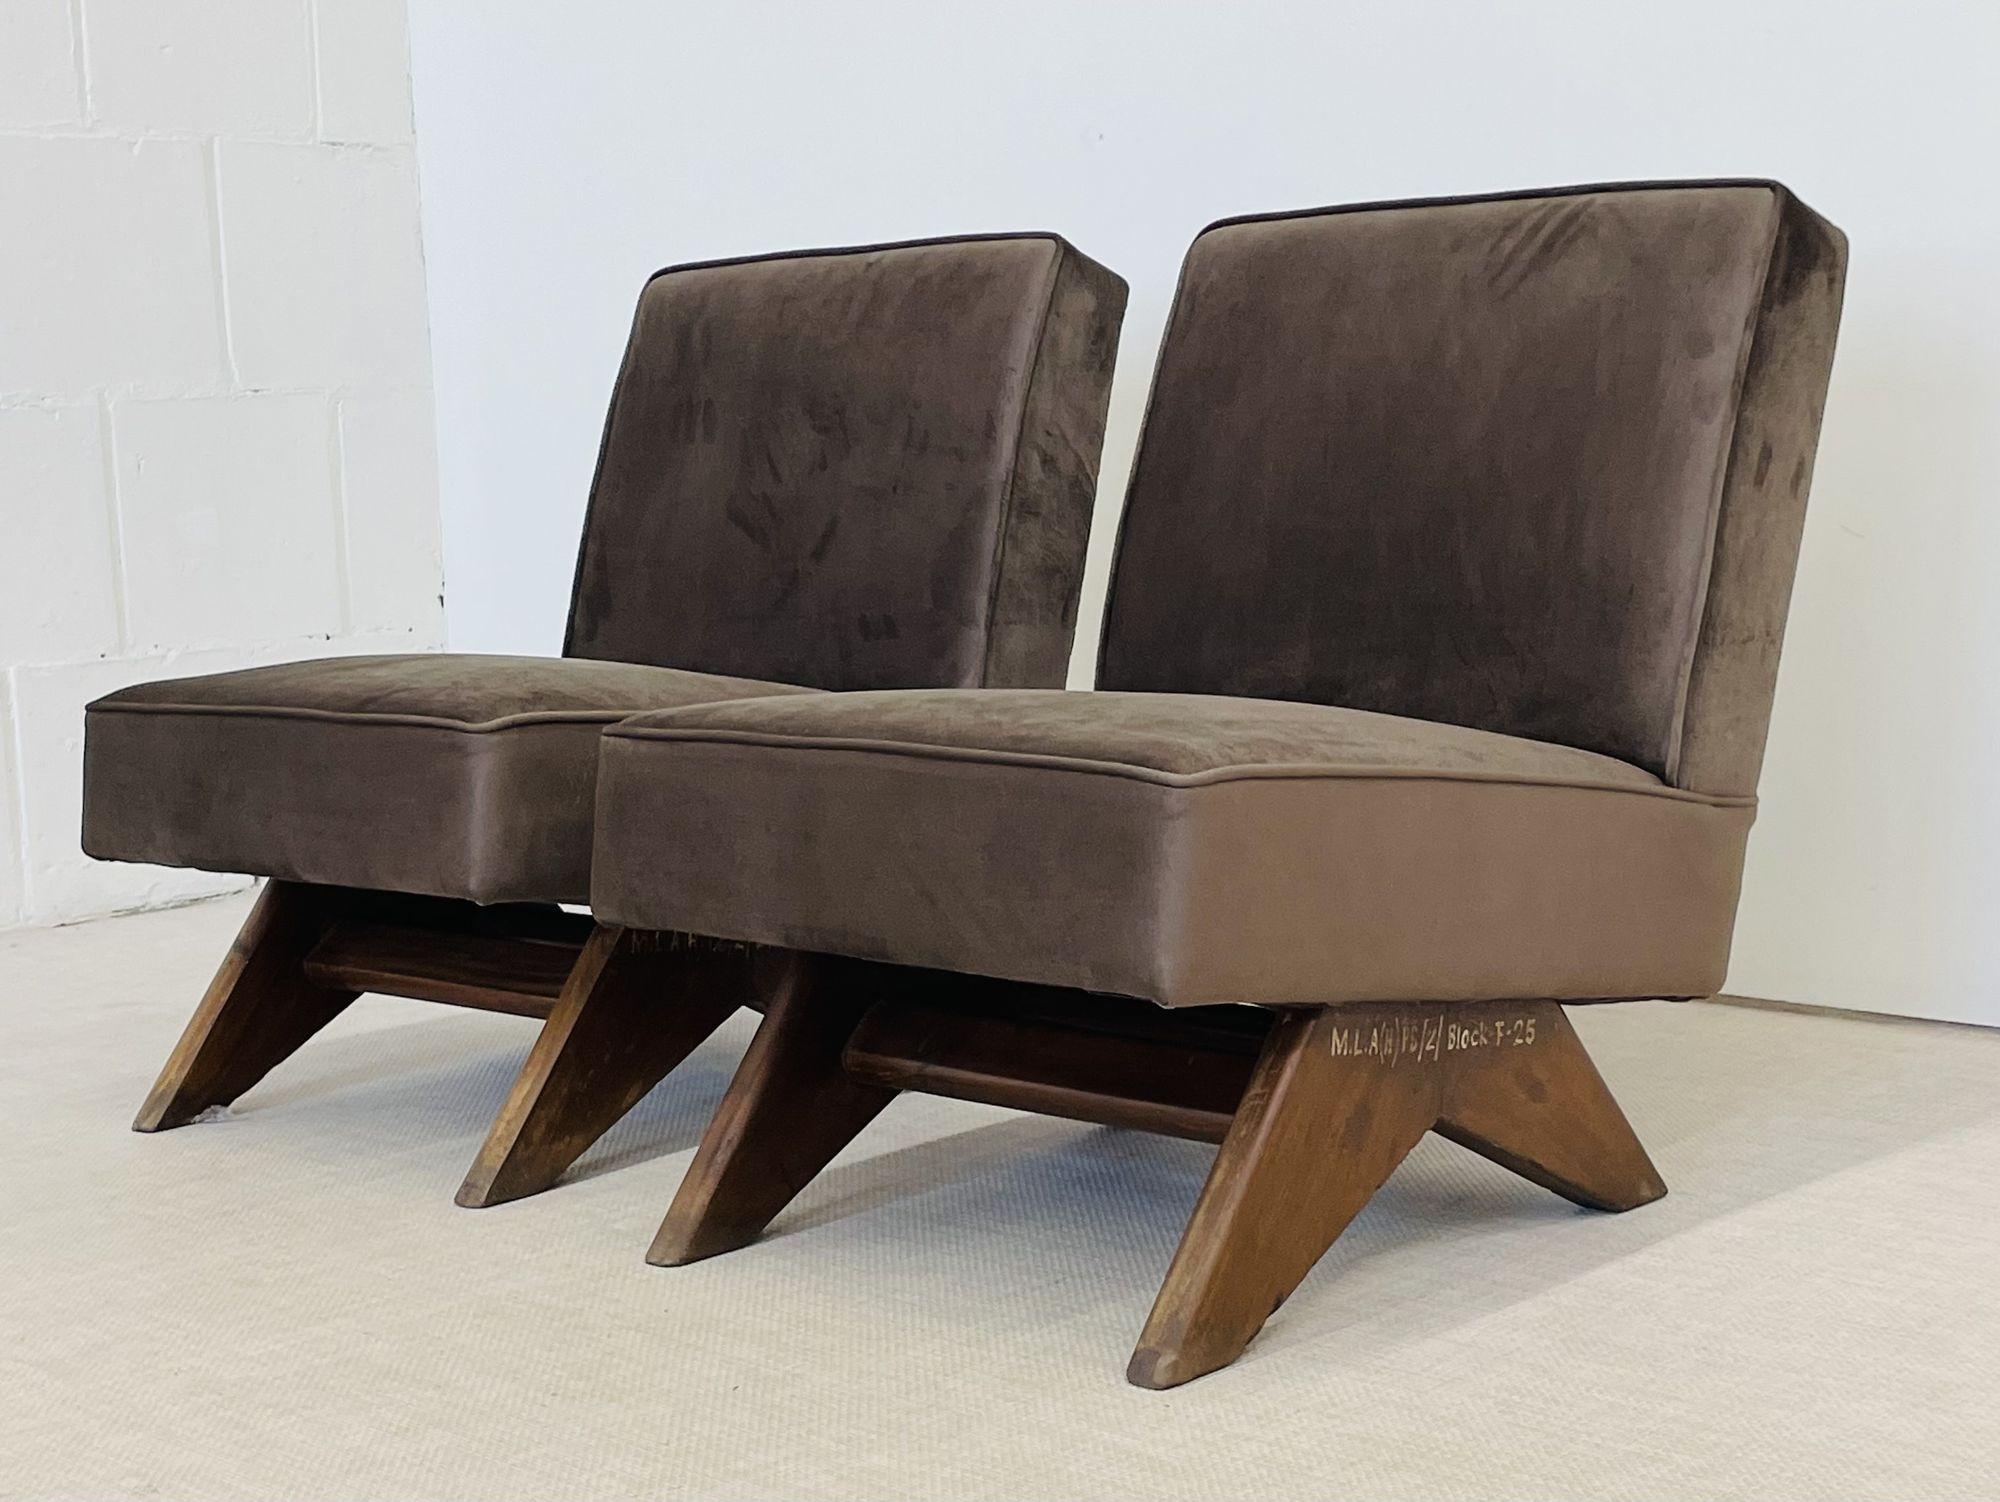 Indian Pierre Jeanneret, French Mid-Century, Slipper Chairs, Teak, Fabric, India, 1960s